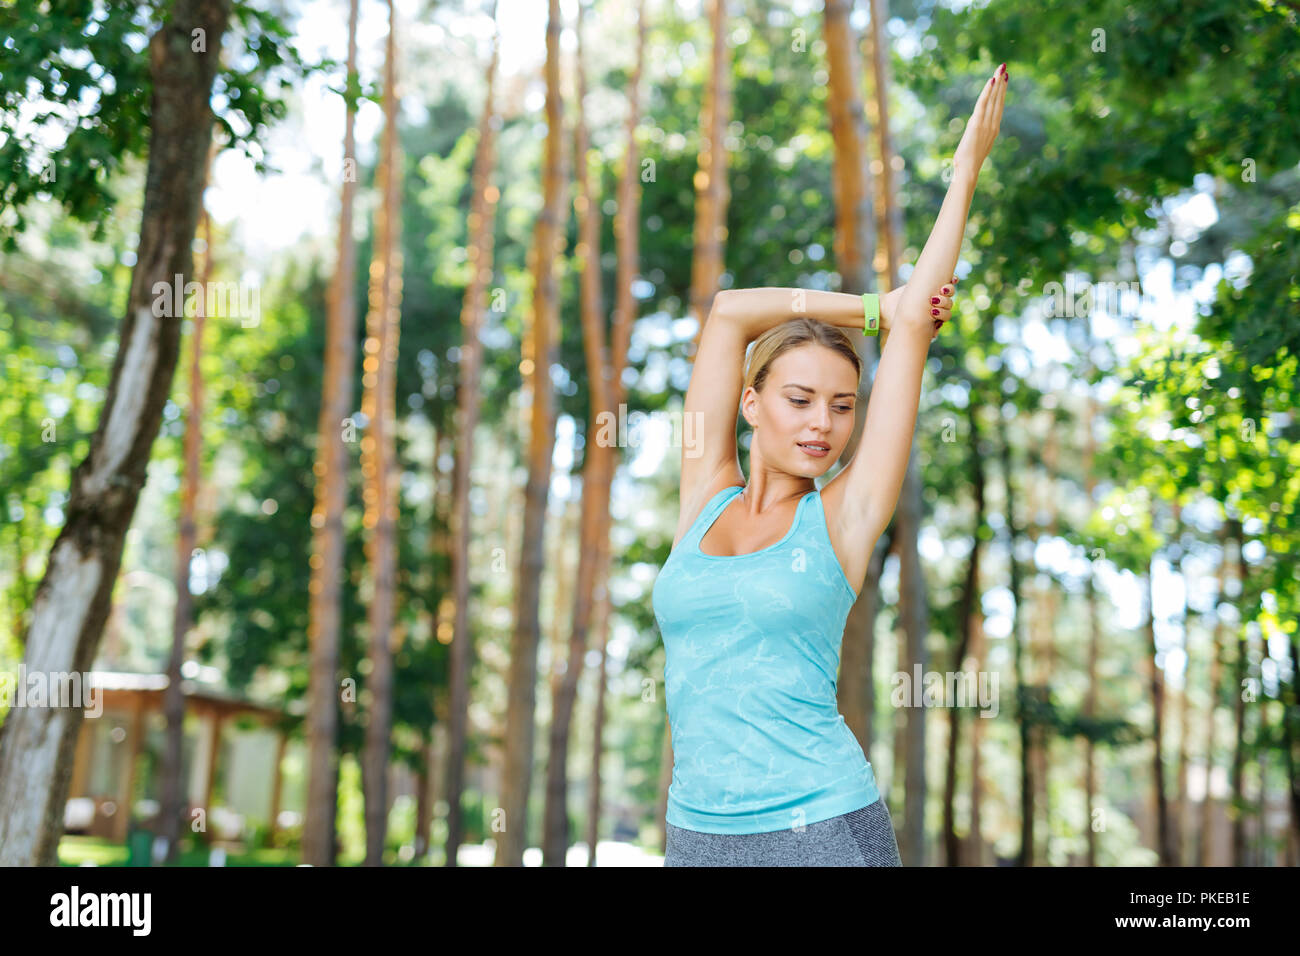 Pleasant nice young woman practicing yoga outdoors Stock Photo